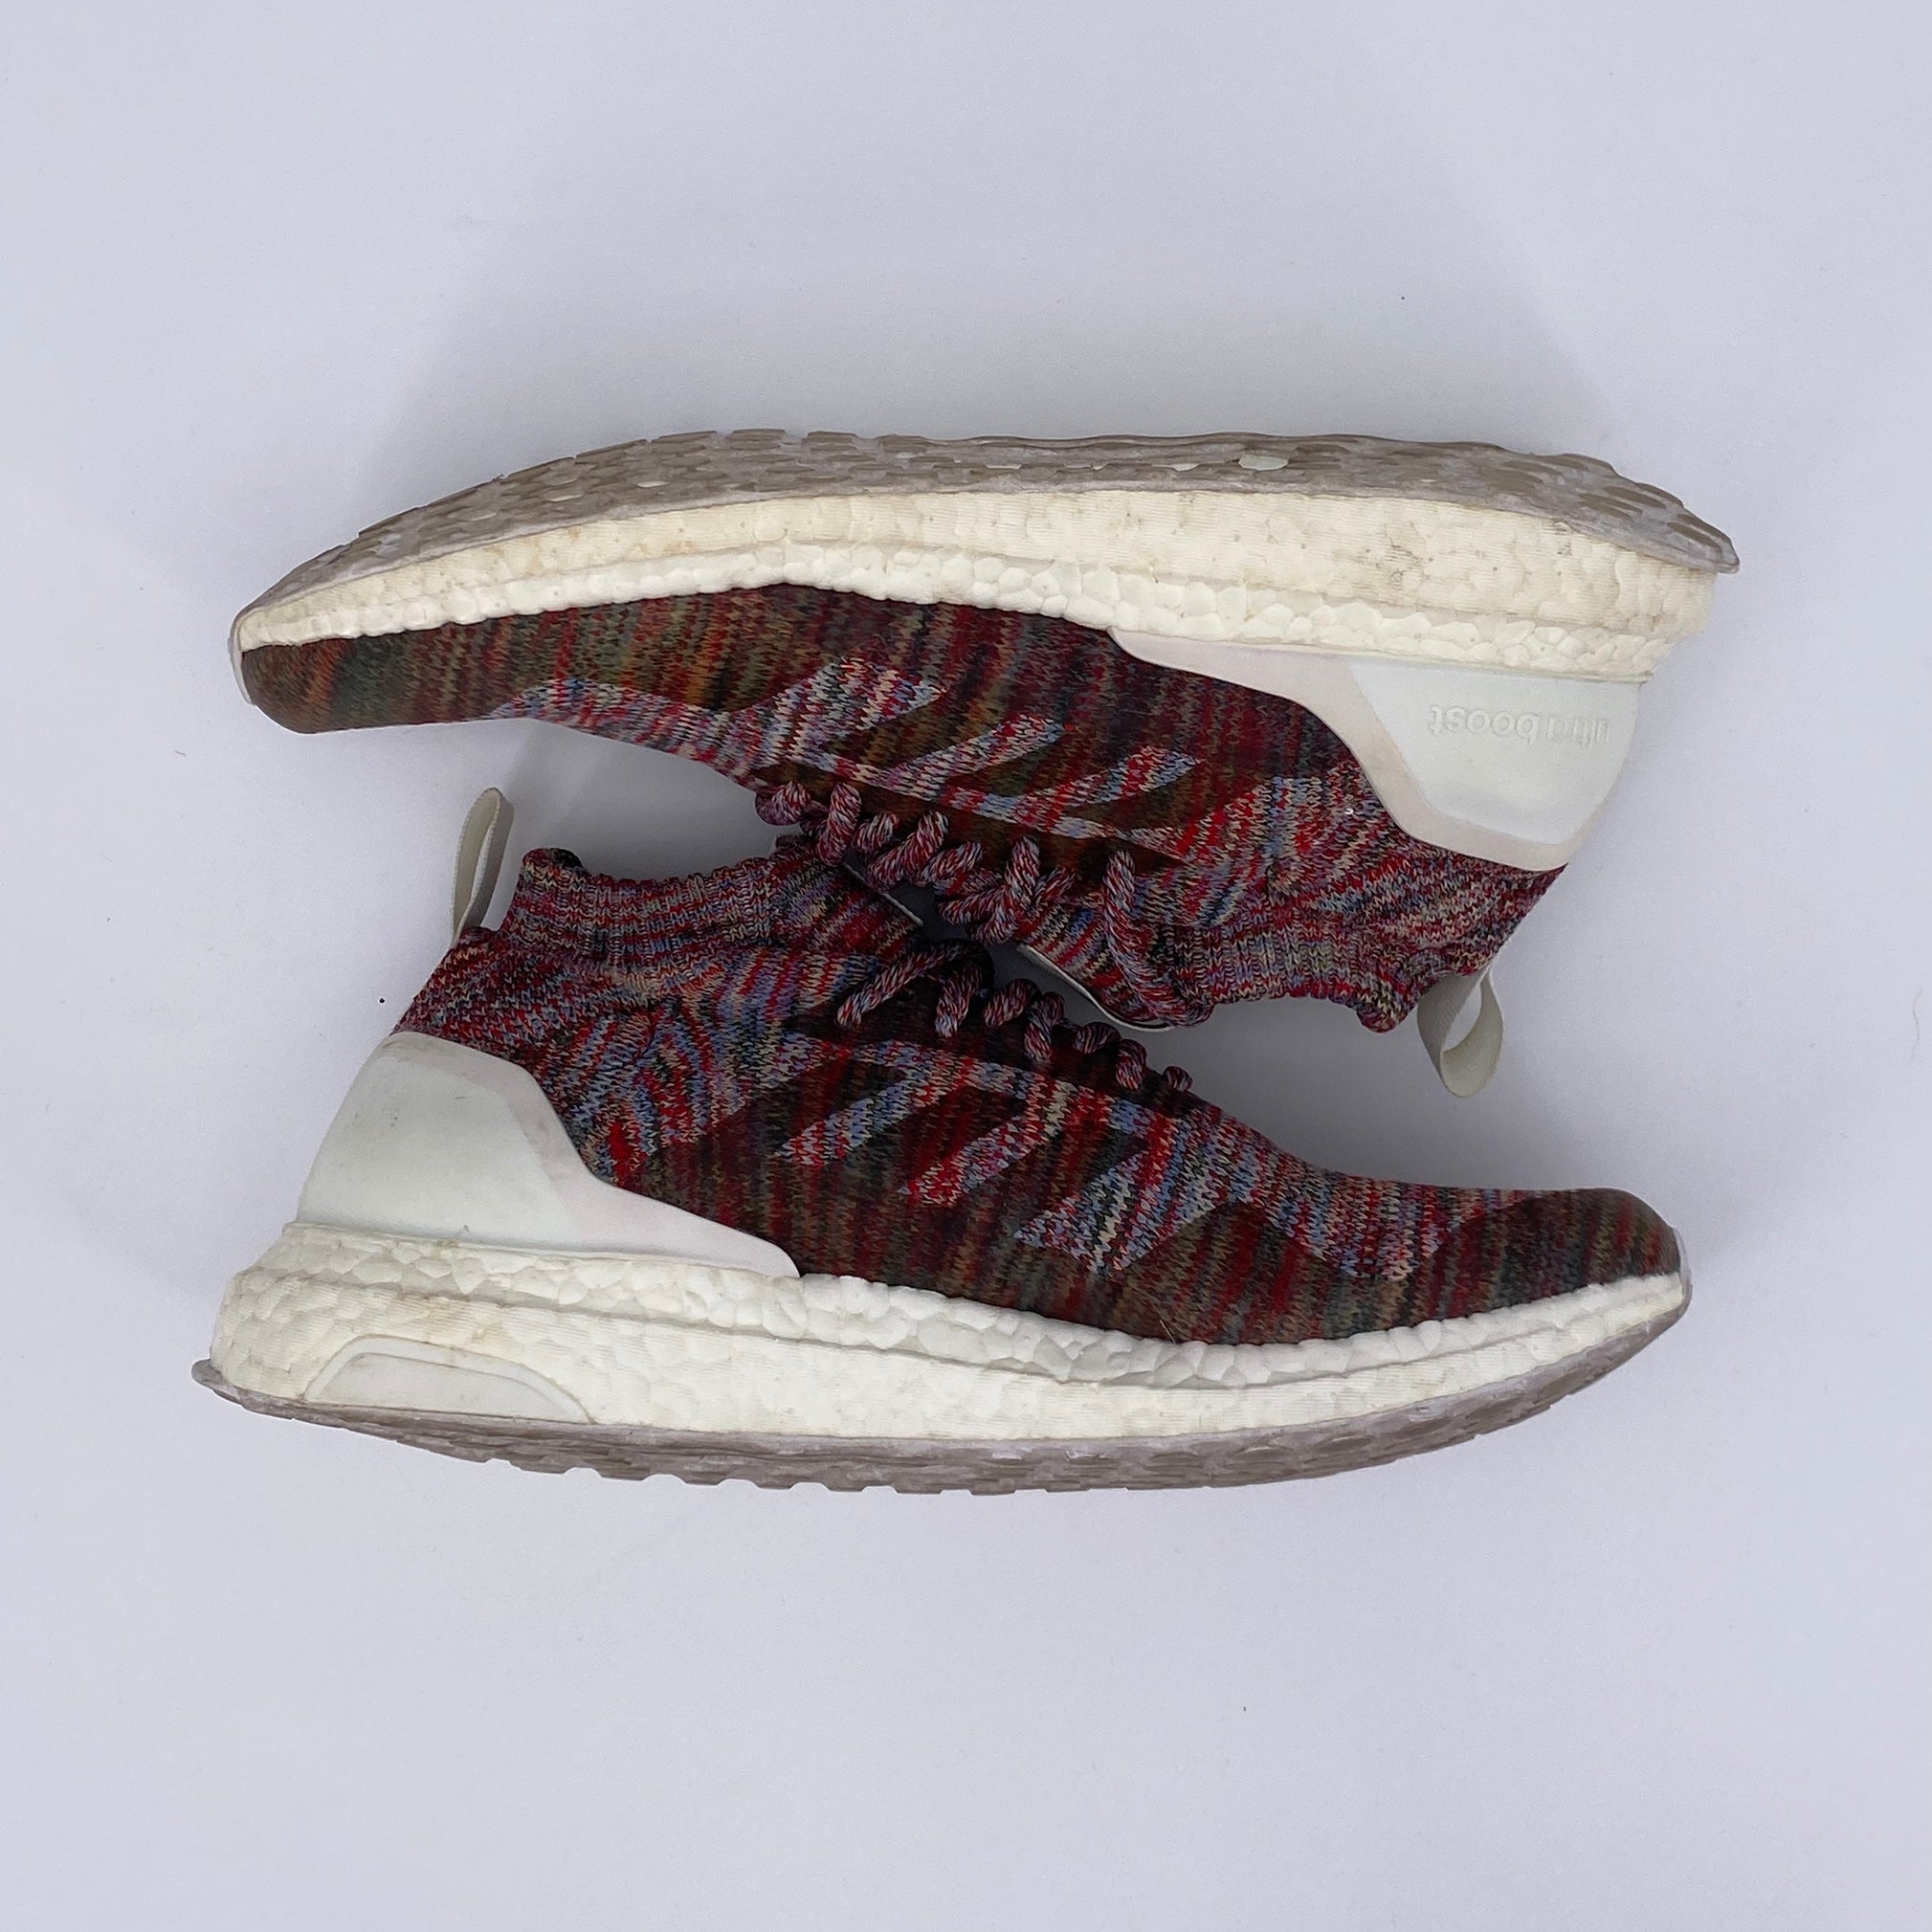 Adidas Ultra Boost Mid "Kith" 2016 Used Size 7.5